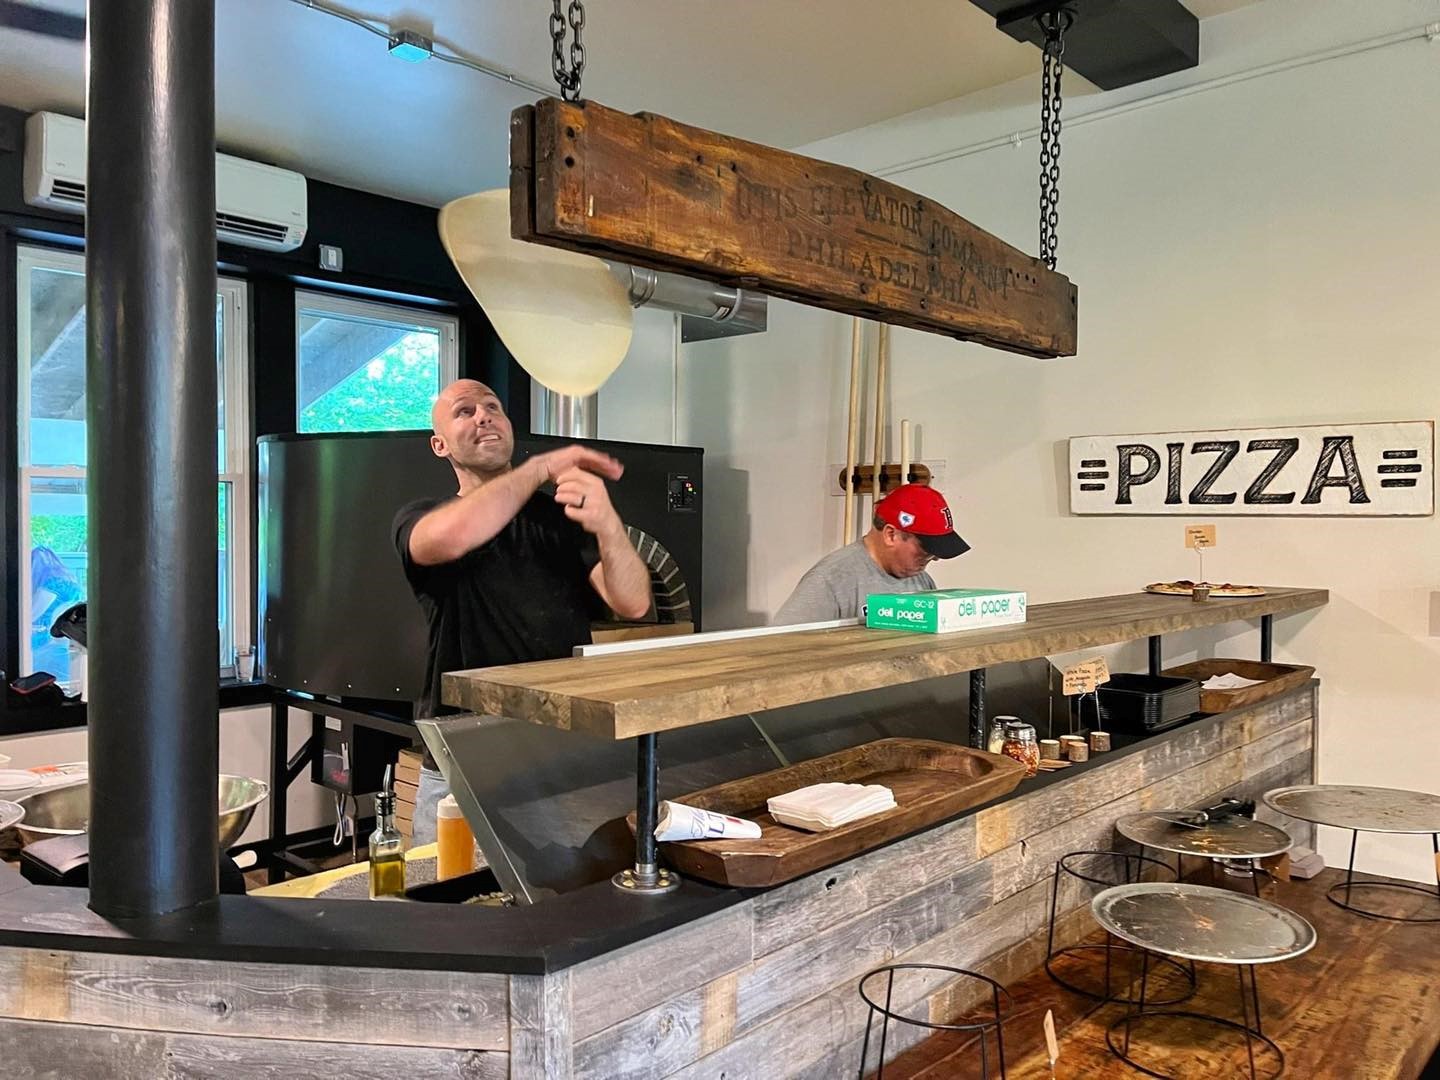 Image of employee tossing pizza